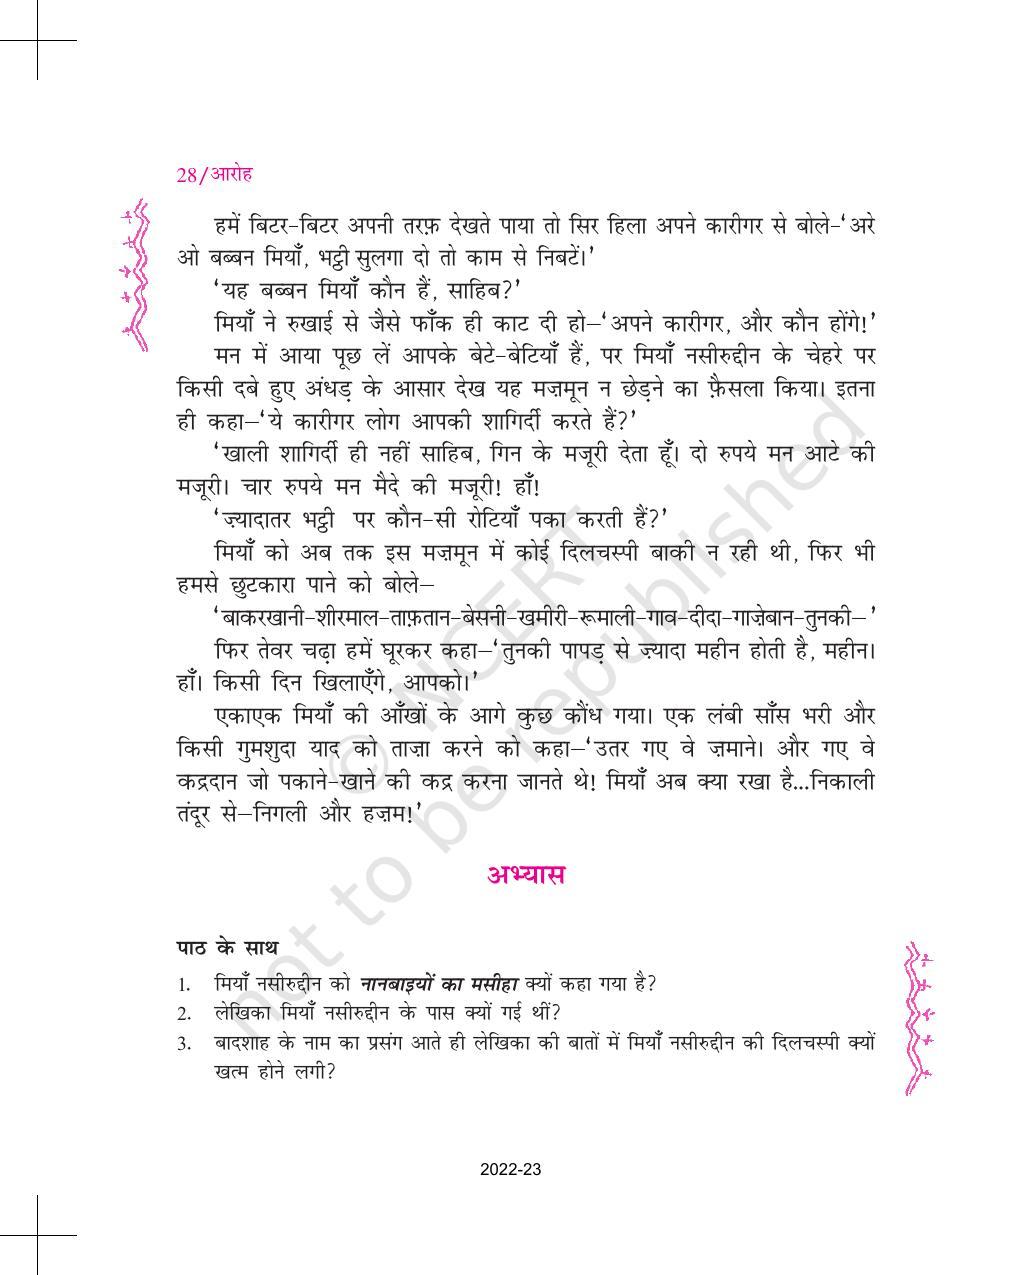 NCERT Book for Class 11 Hindi Aroh Chapter 2 मियाँ नसीरुद्दीन - Page 9